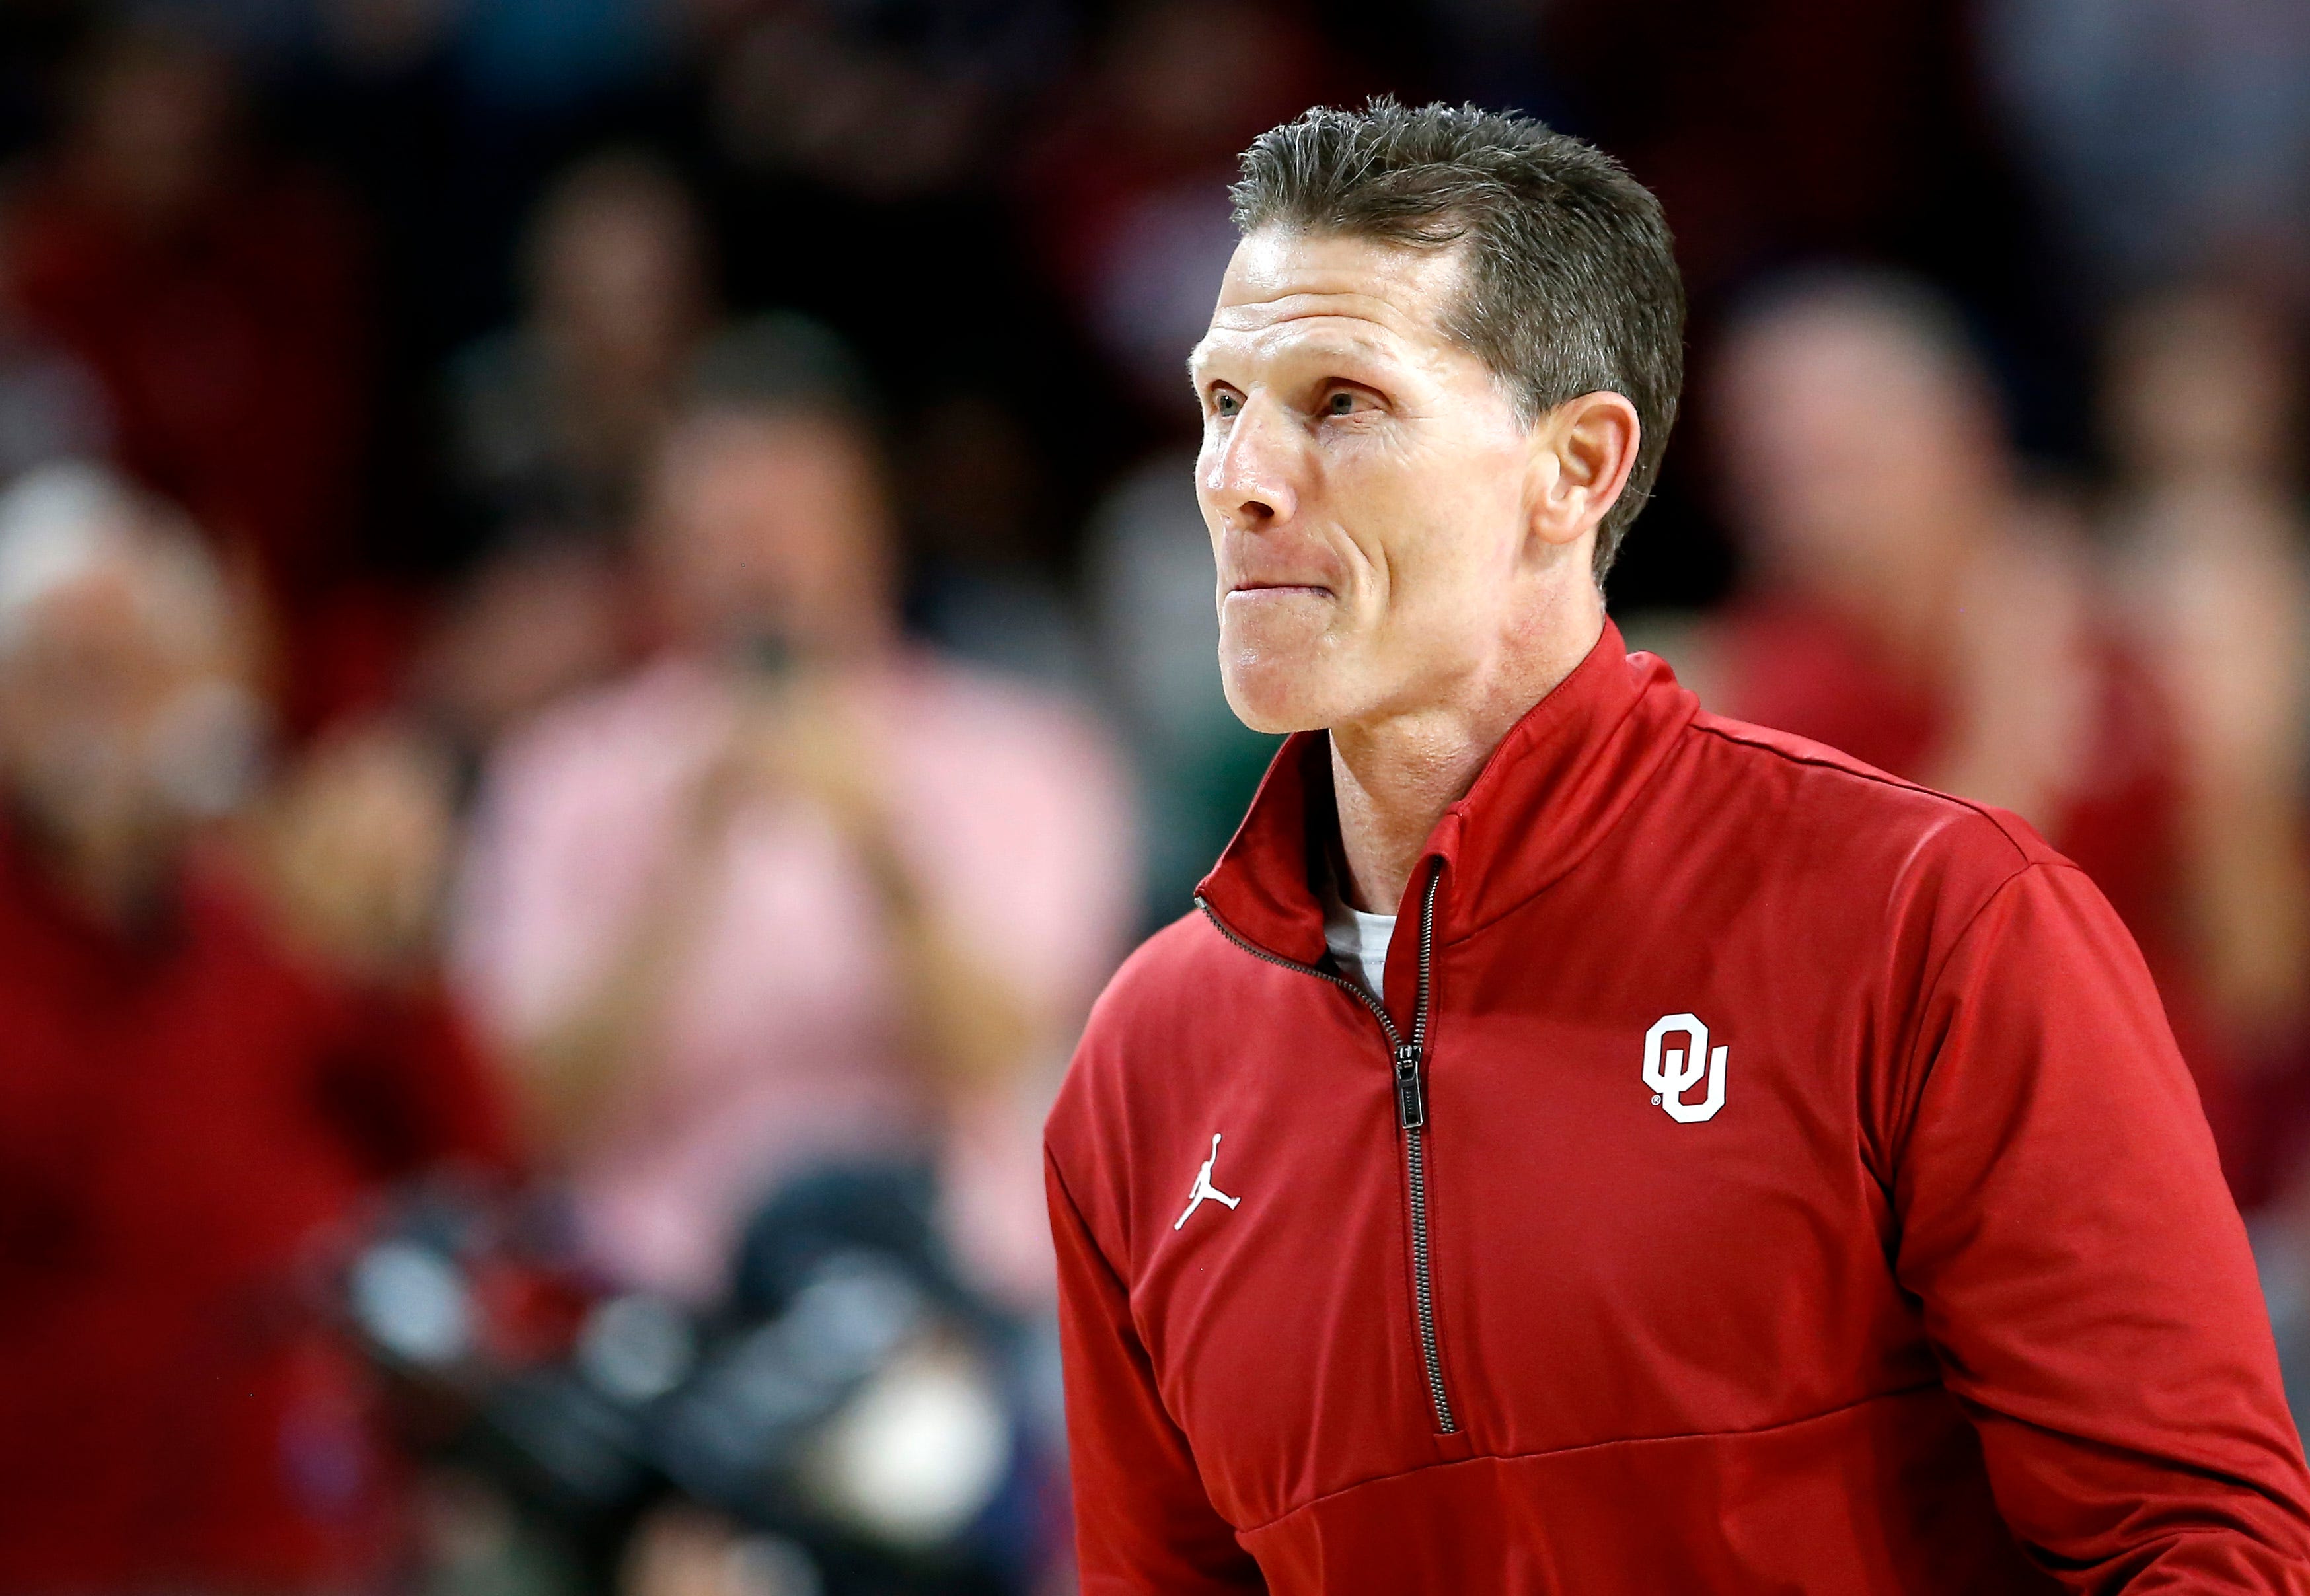 Oklahoma’s Brent Venables is Using Social Media Reports to Help Vet Recruits